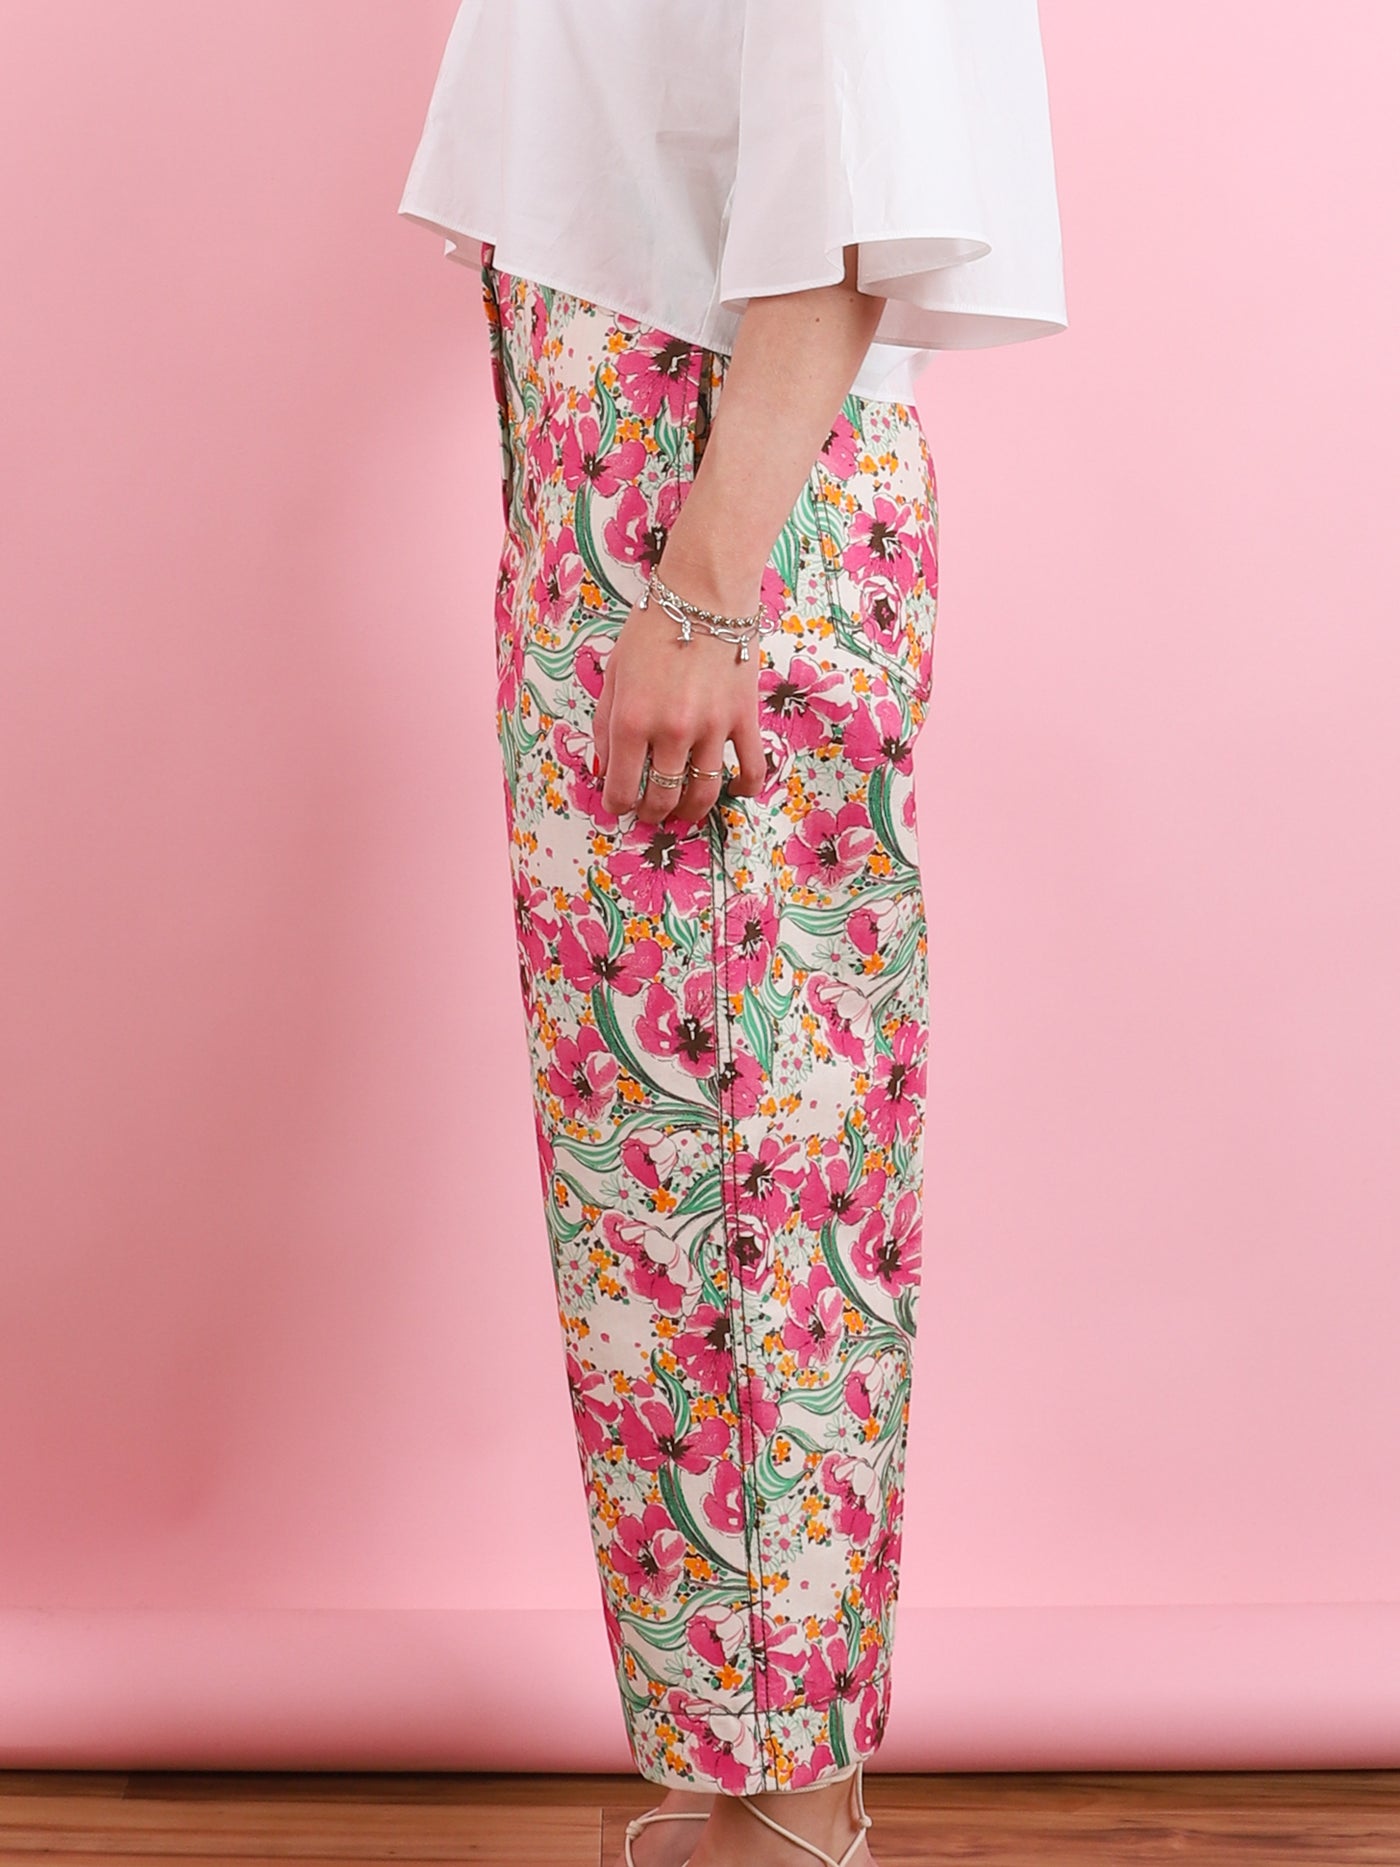 Floral Tailored Pants